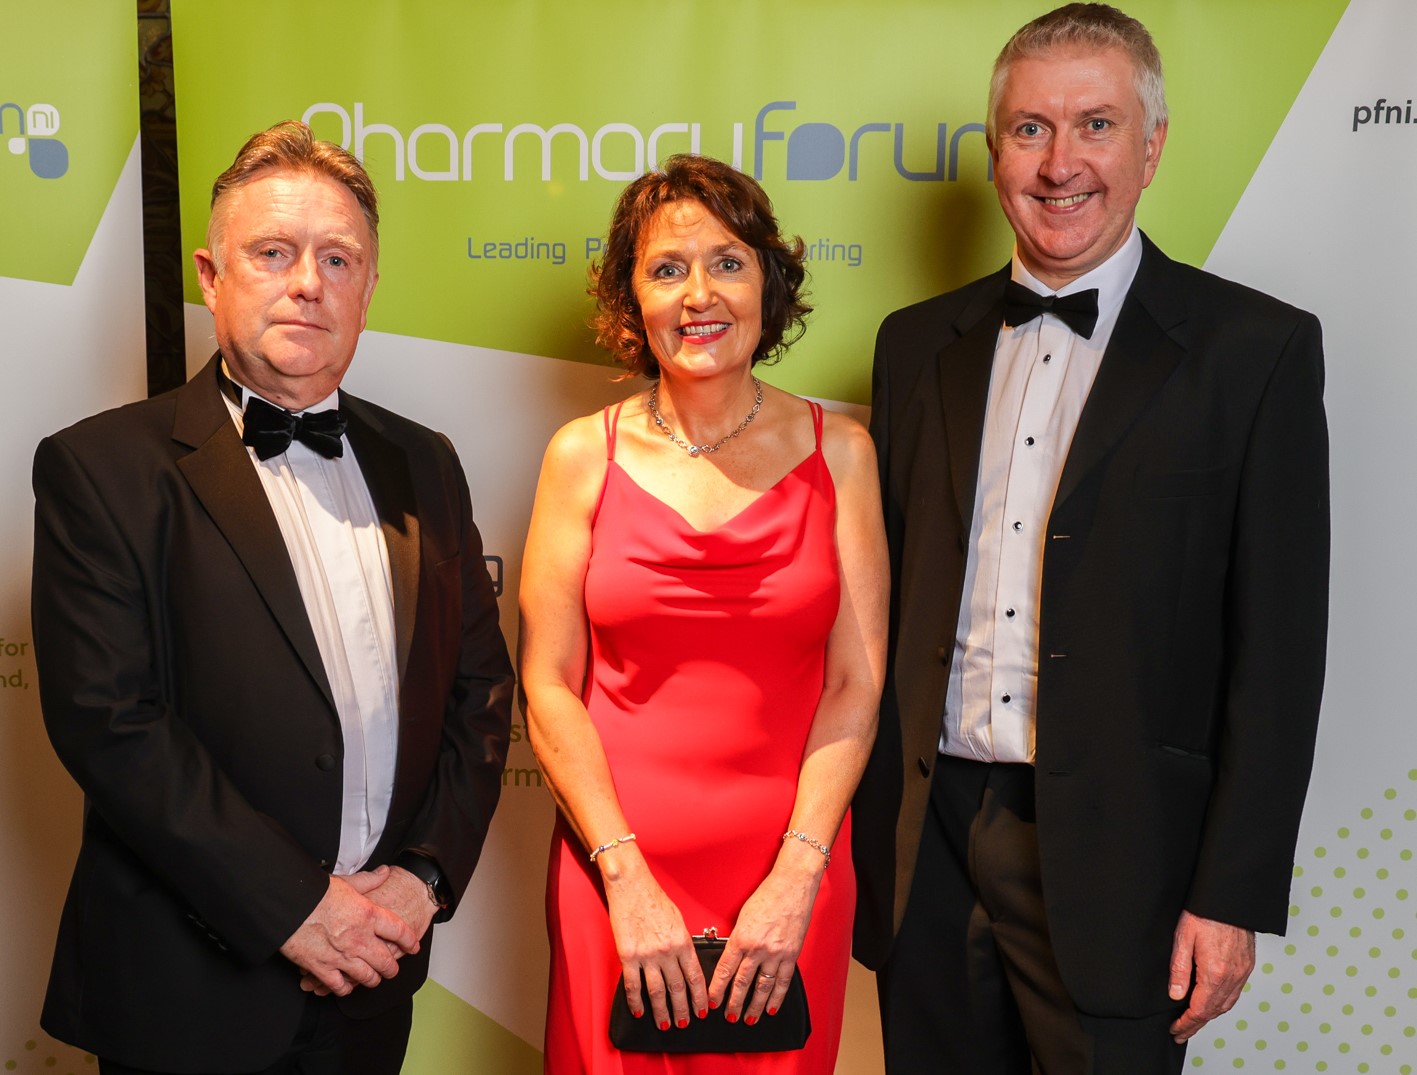 Gala Evening Sees Conferment of New Fellows of the Pharmaceutical Society of Northern Ireland